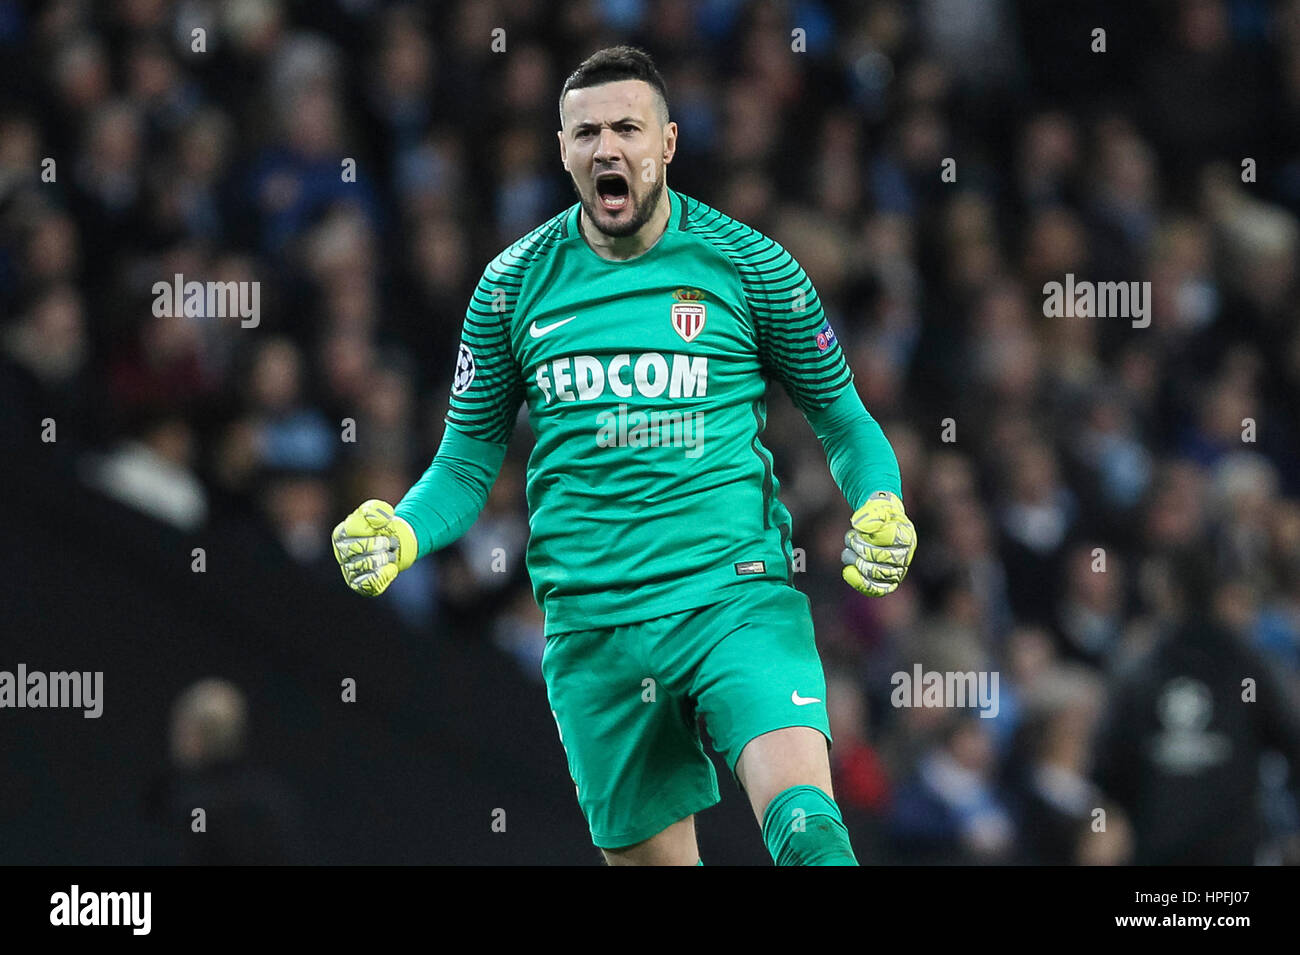 Manchester, UK. 21st Feb, 2017. Danijel Subasic of Monaco celebrates his side's first goal during the UEFA Champions League Round of 16 first leg match between Manchester City and AS Monaco at the Etihad Stadium on February 21st 2017 in Manchester, England. Credit: PHC Images/Alamy Live News Stock Photo